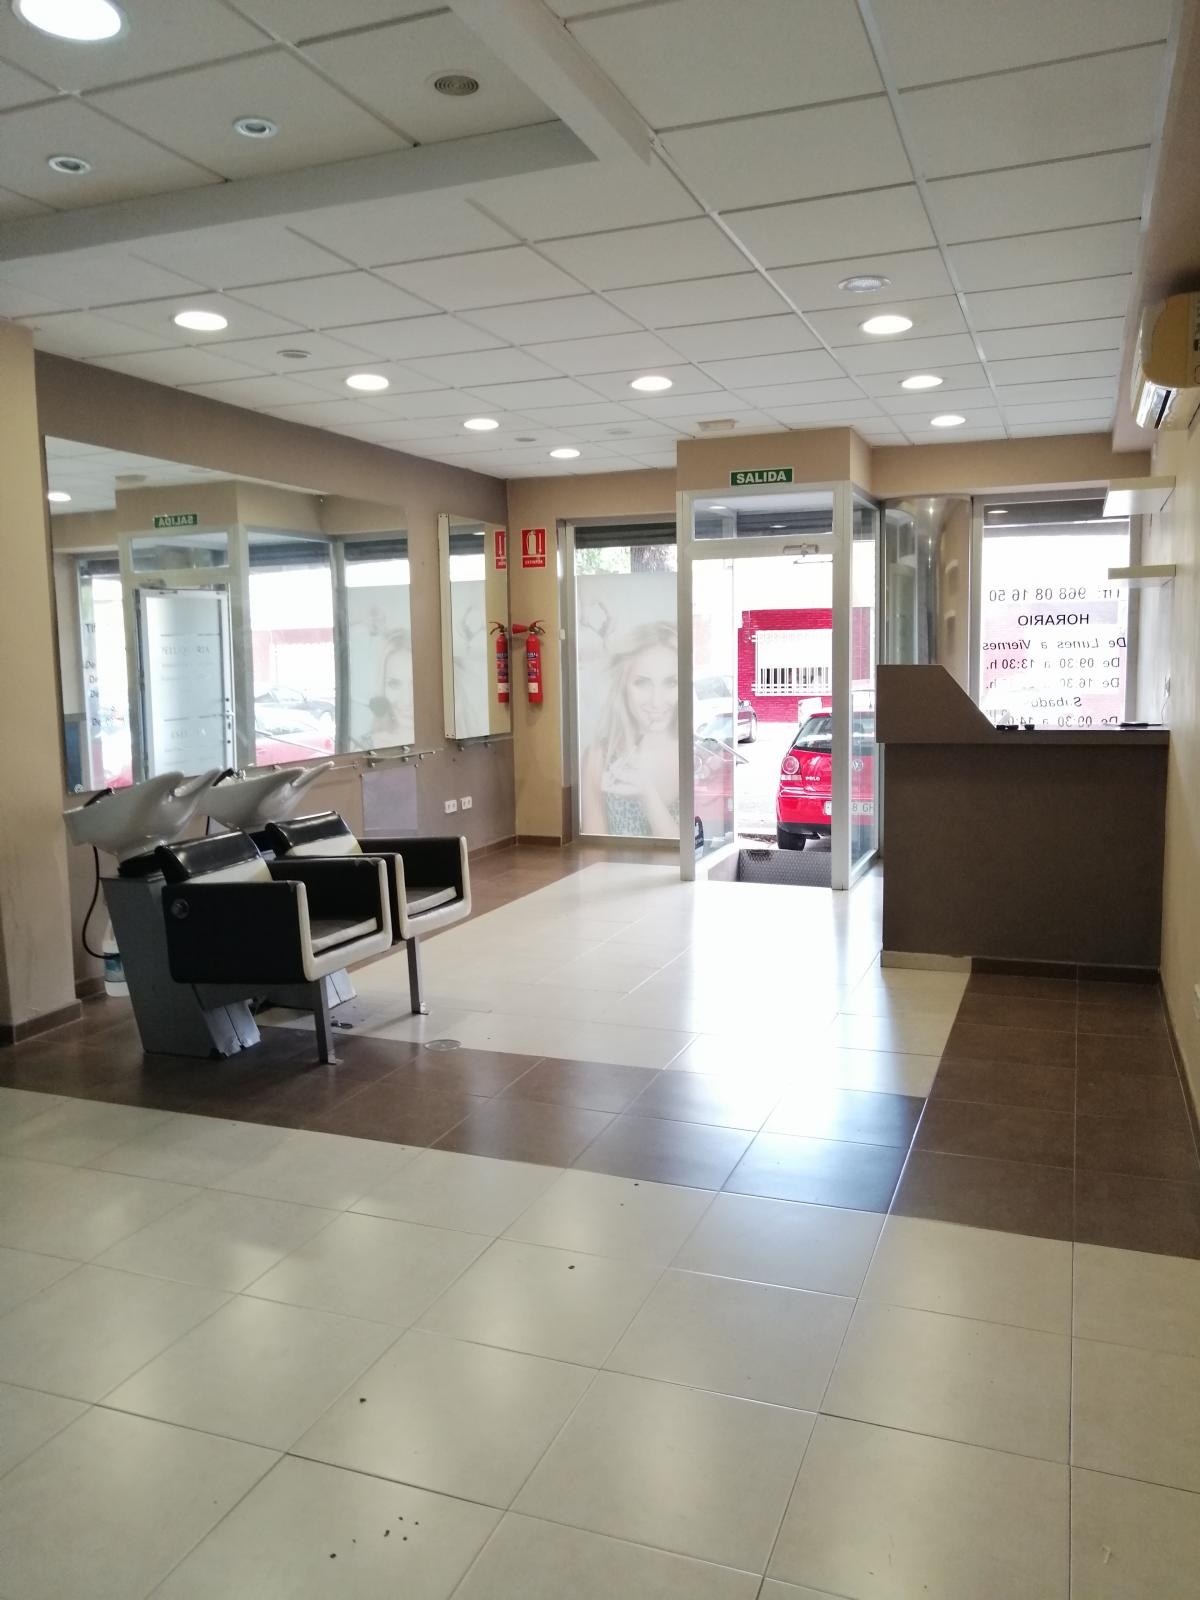 Business local for sale in Cartagena